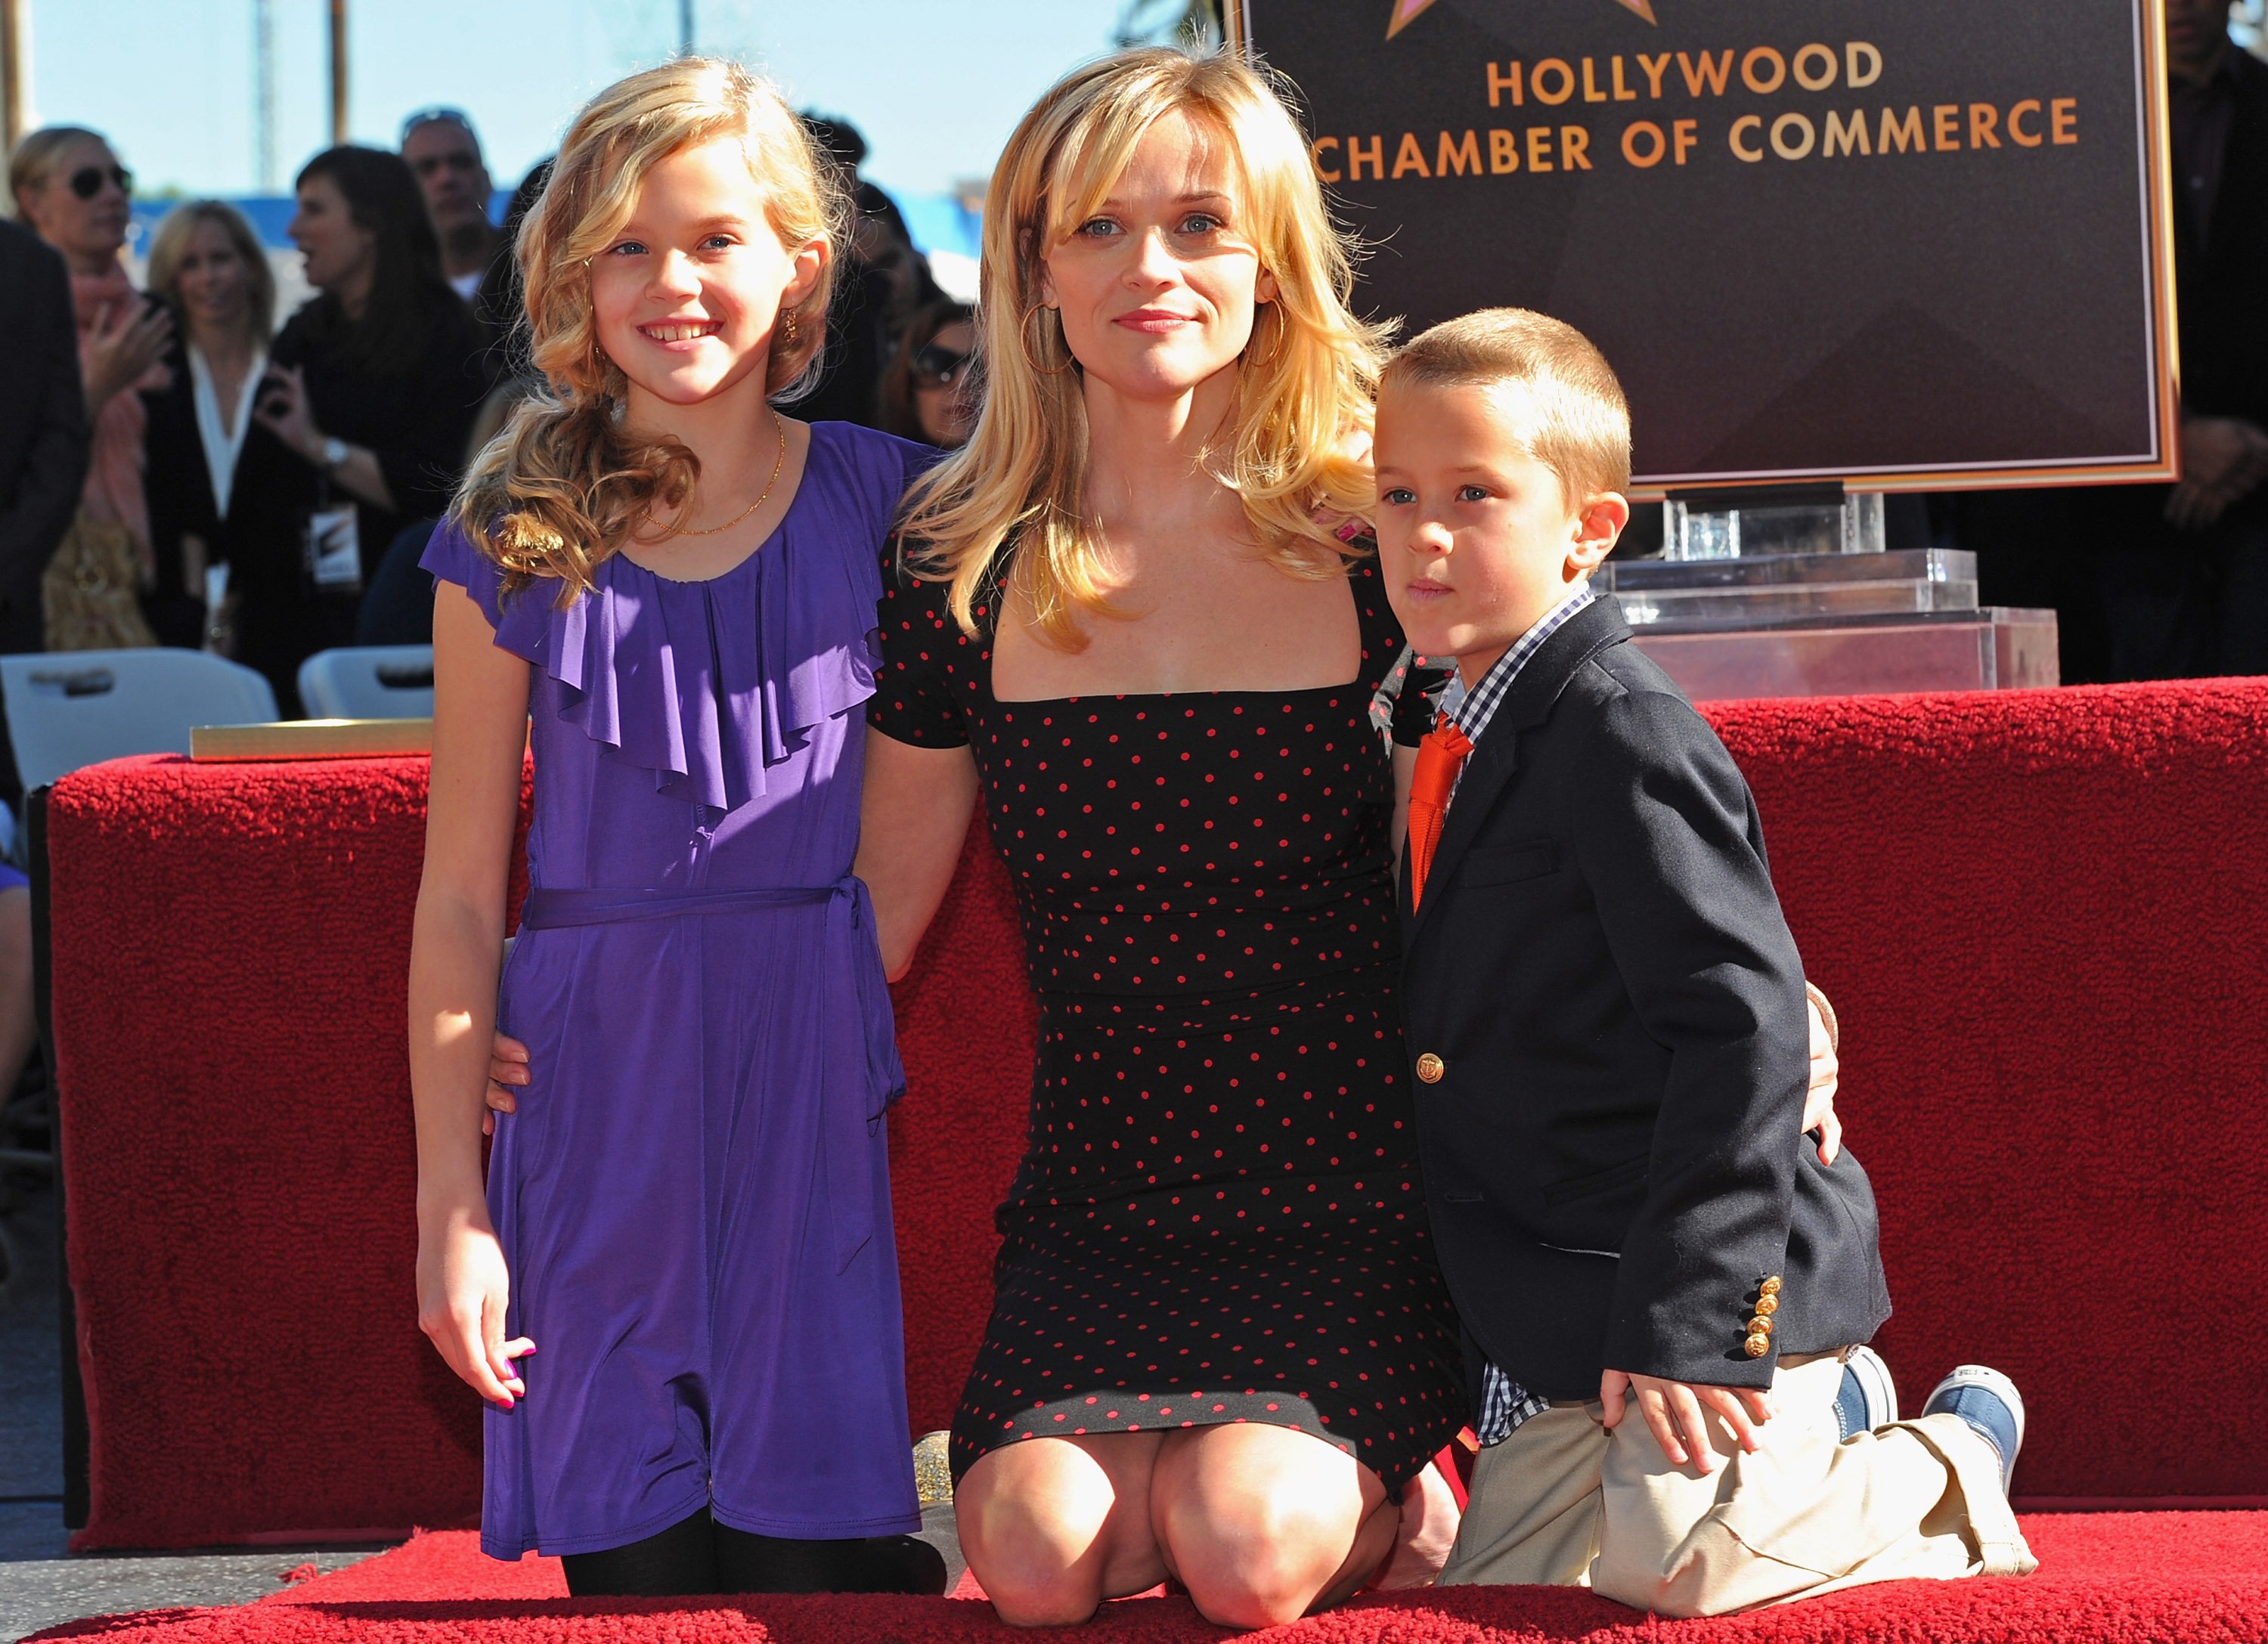 Reese Witherspoon with daughter Ava and son Deacon Phillippe at the Hollywood Walk of Fame Star honoring the actress in Hollywood, California on December 1, 2010 | Photo: Getty Images